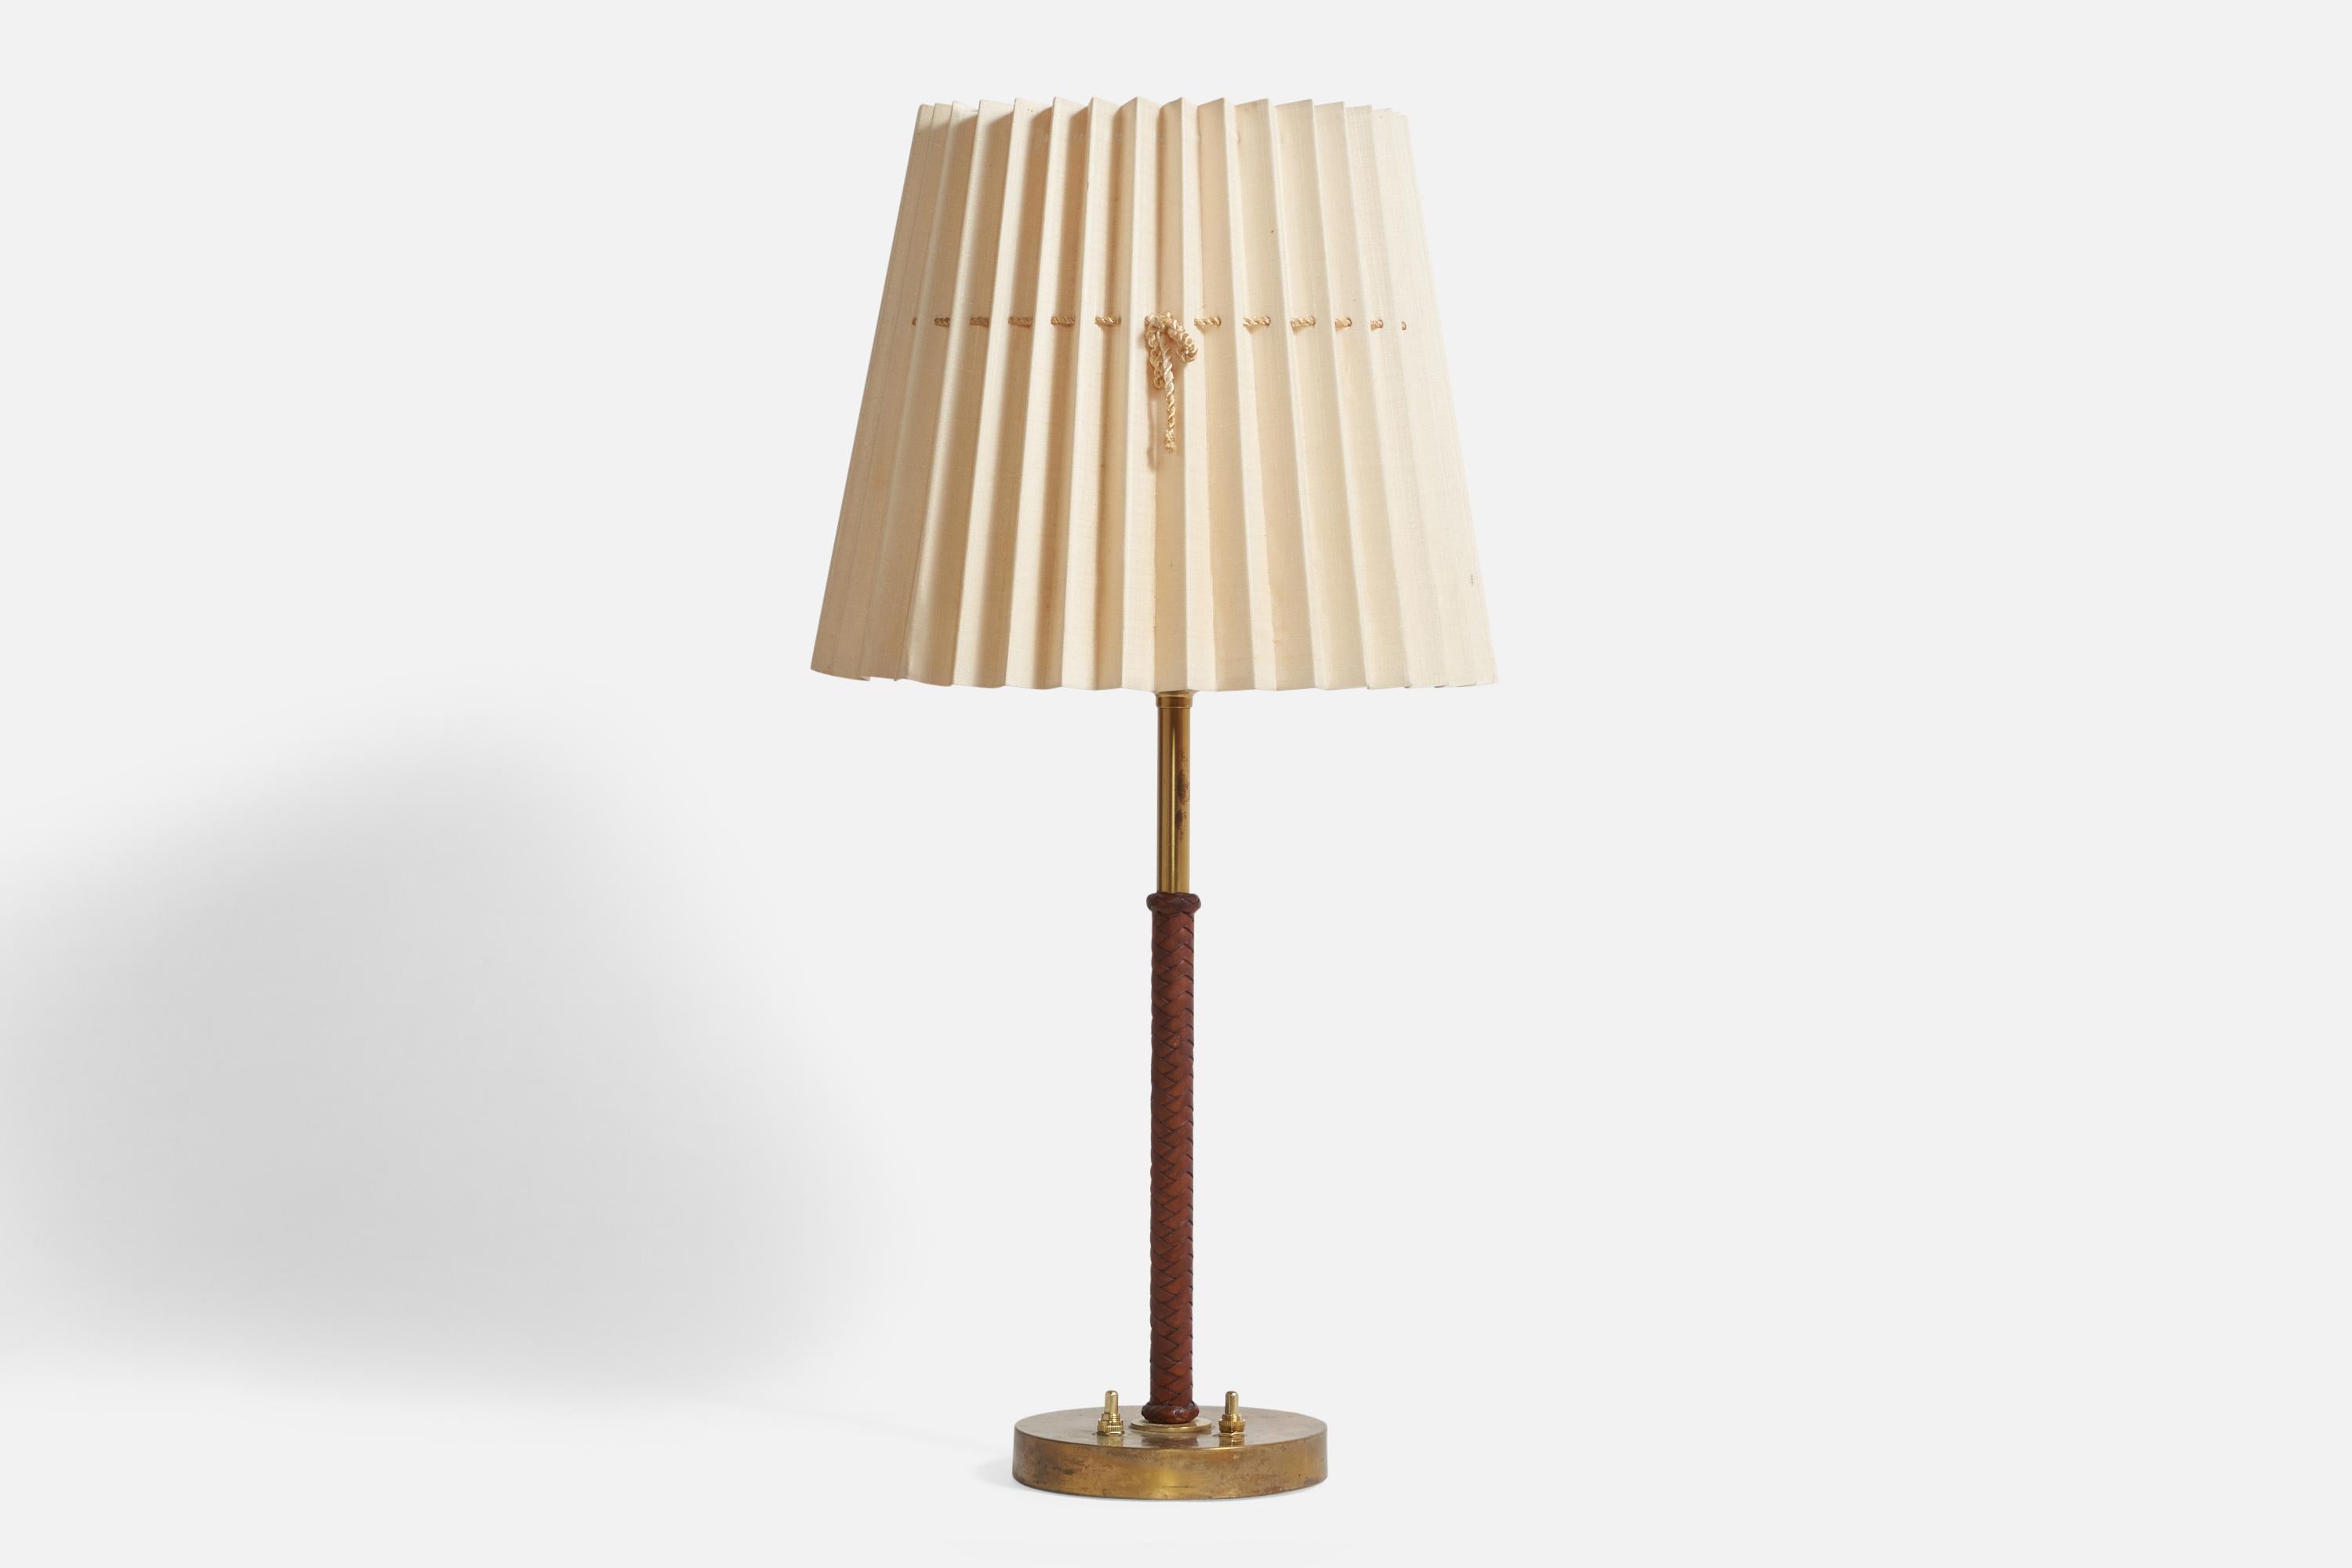 A brass, braided brown leather and light beige paper table lamp designed by Bertil Brisborg and produced by Nordiska Kompaniet, Sweden, 1940s.

Overall Dimensions (inches): 25” H x 12.5” Diameter
Bulb Specifications: E-26 Bulbs
Number of Sockets: